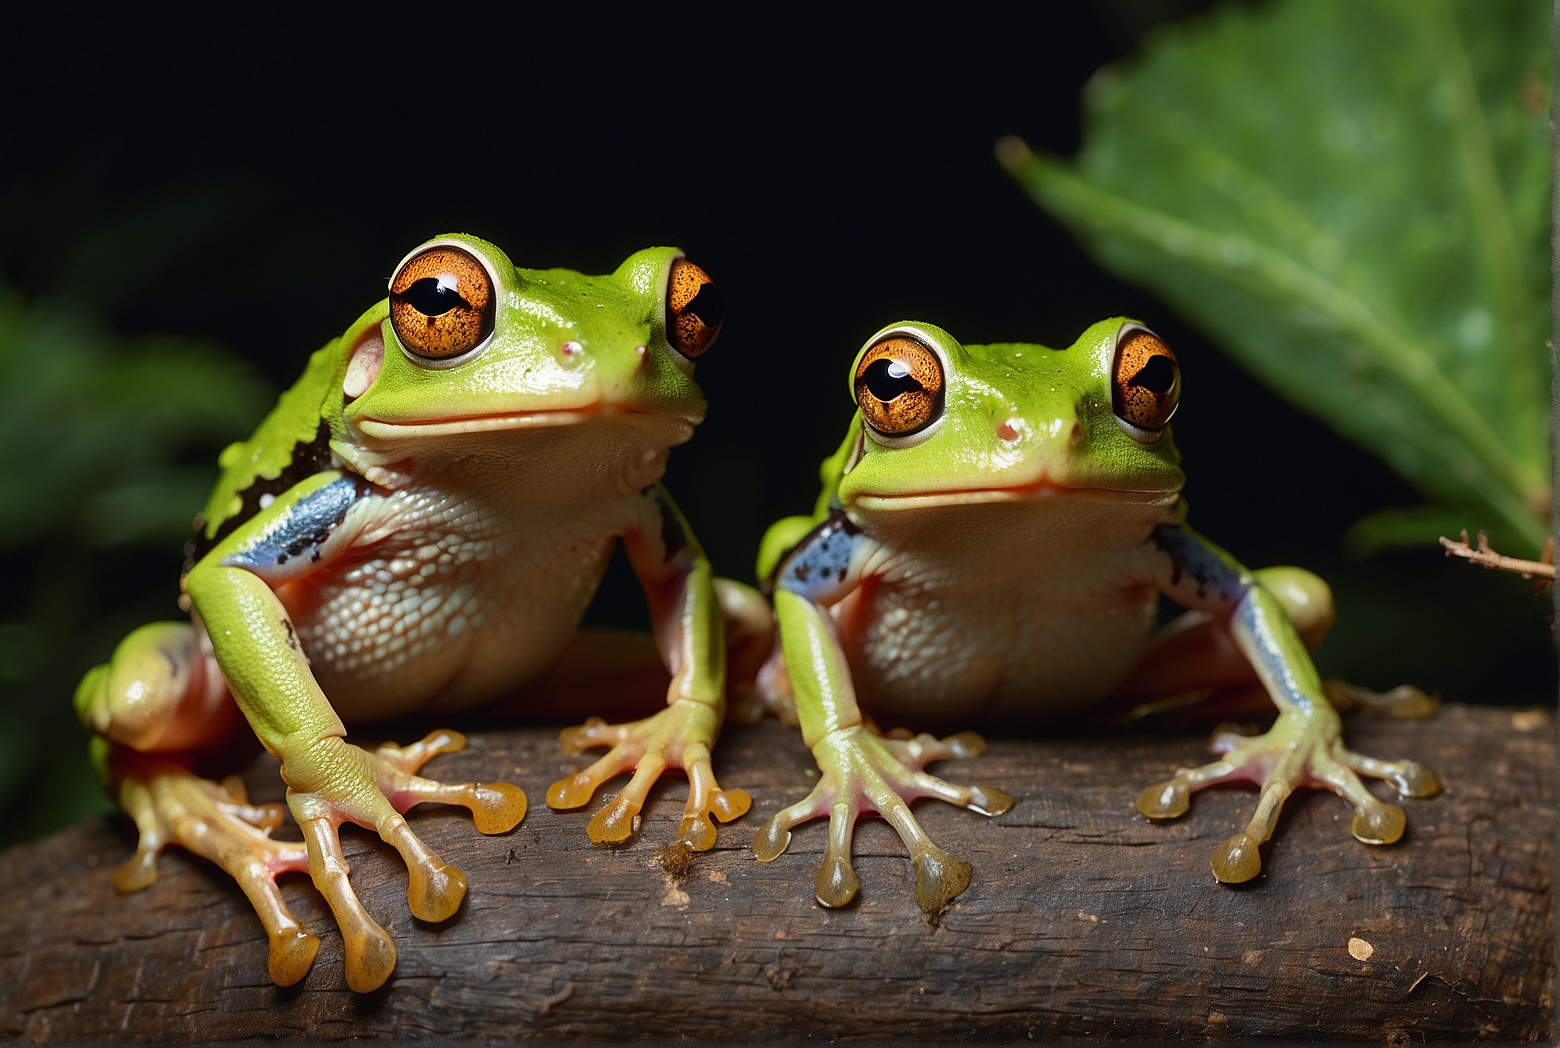 Discovering the Nocturnal Habit of Tree Frogs